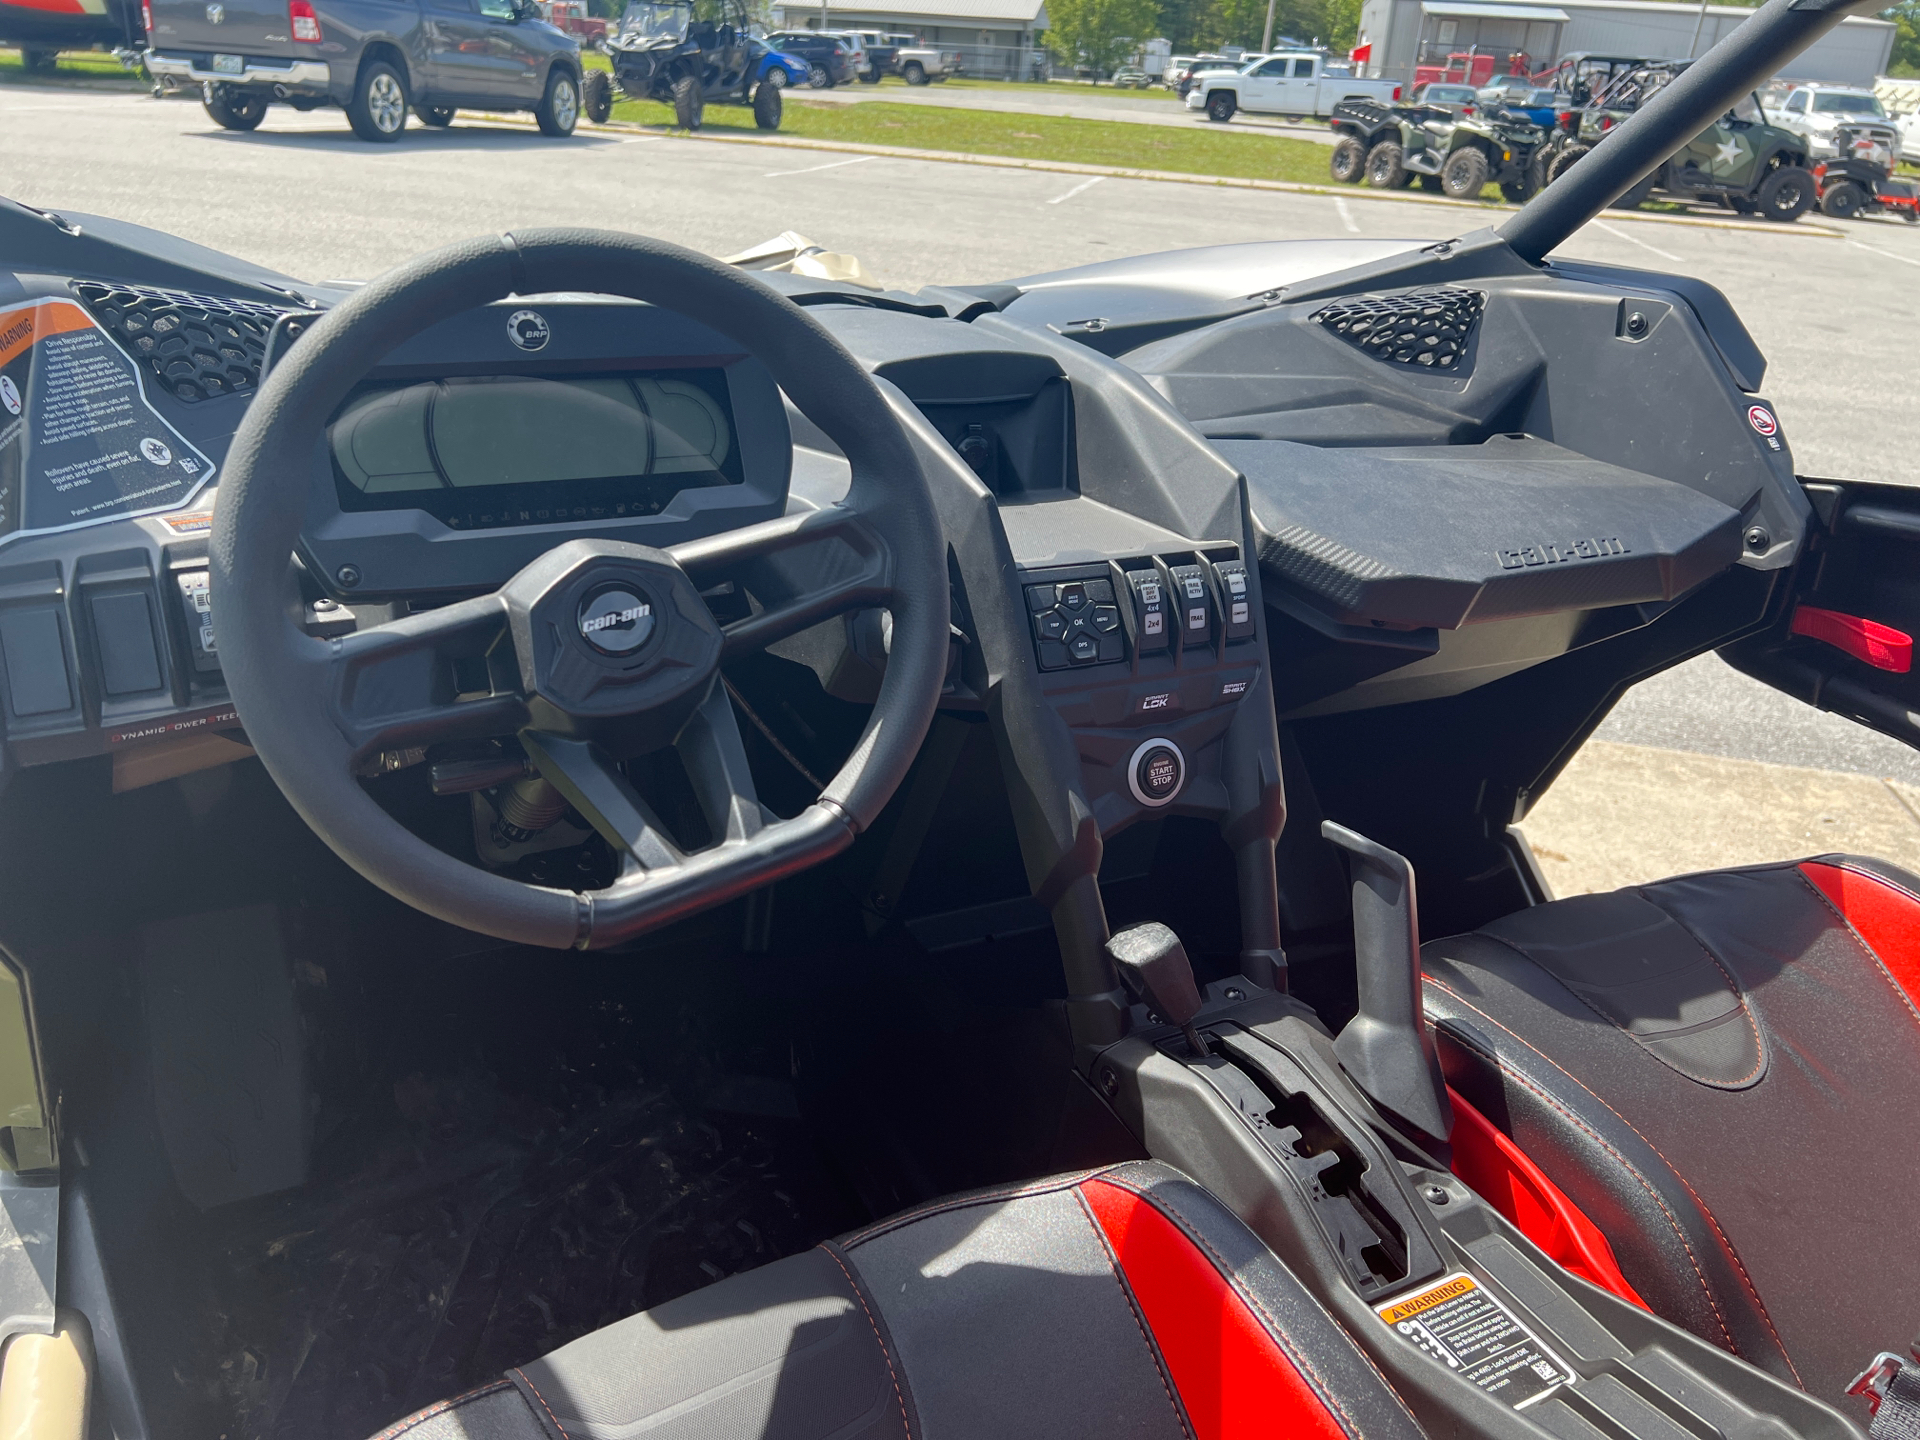 2023 Can-Am Maverick X3 X RS Turbo RR with Smart-Shox 72 in Crossville, Tennessee - Photo 6